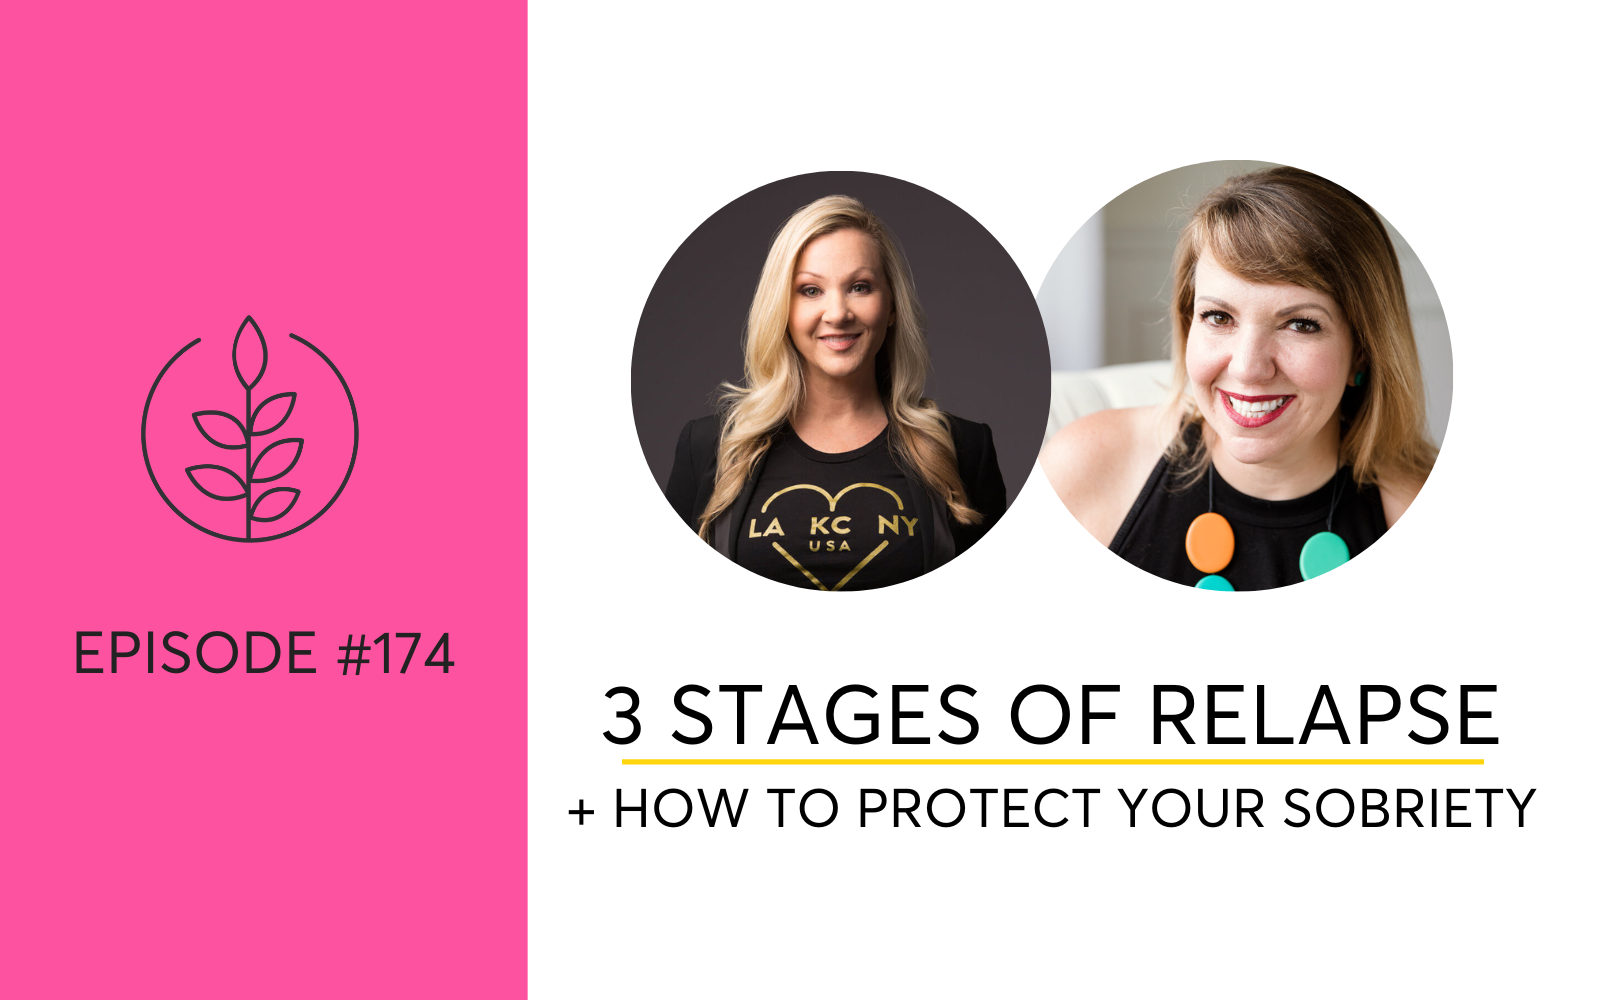 3 Stages of Relapse + How To Protect Your Sobriety